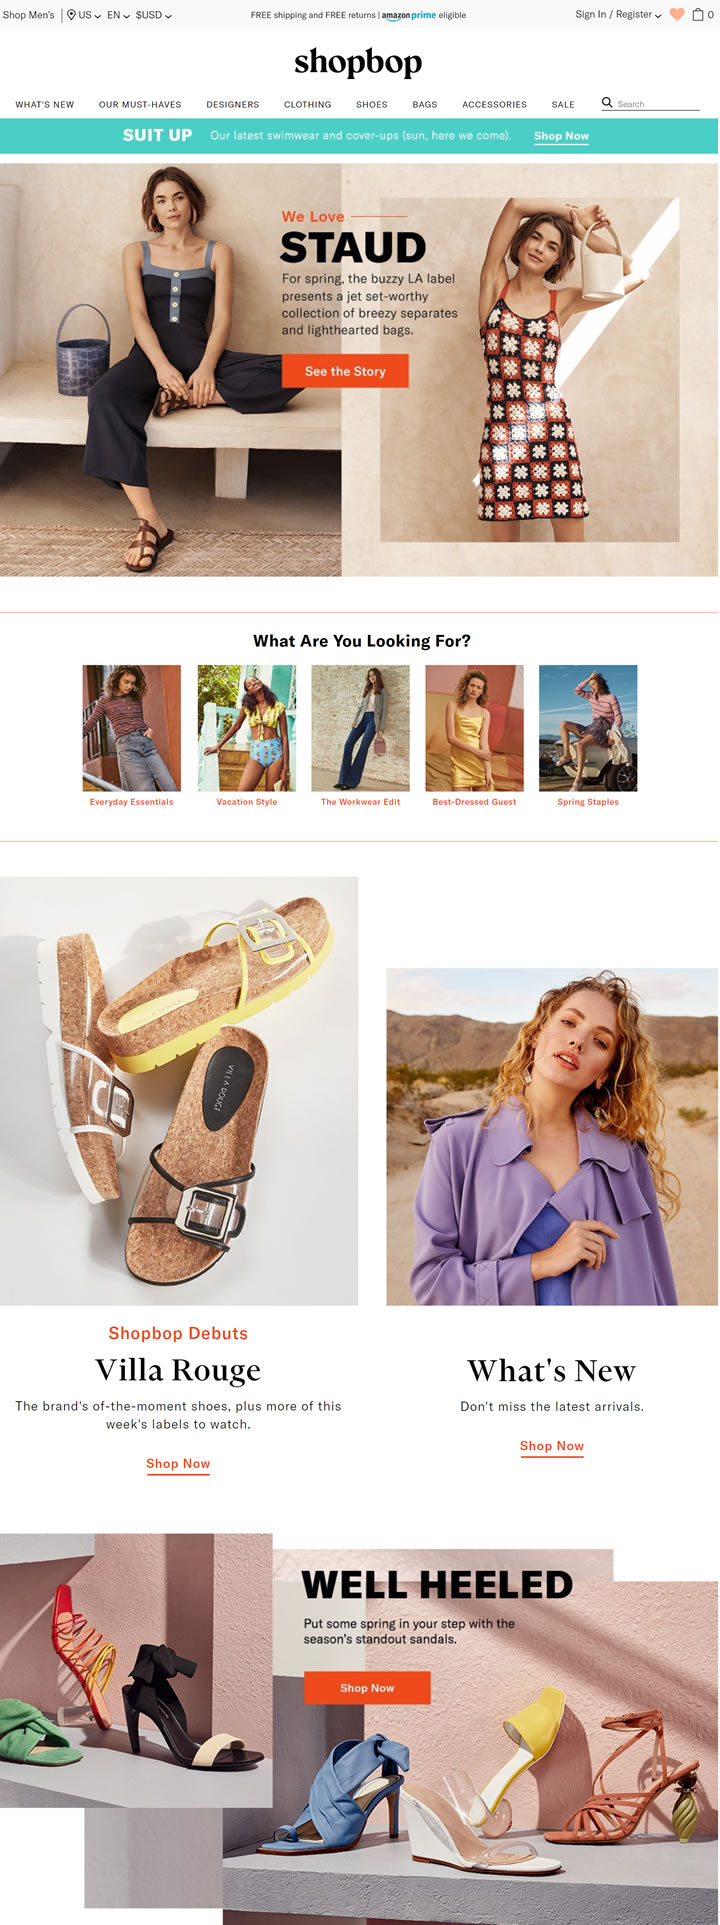 US Online Fashion Apparel and Accessories Shop: Shopbop - World68 ...